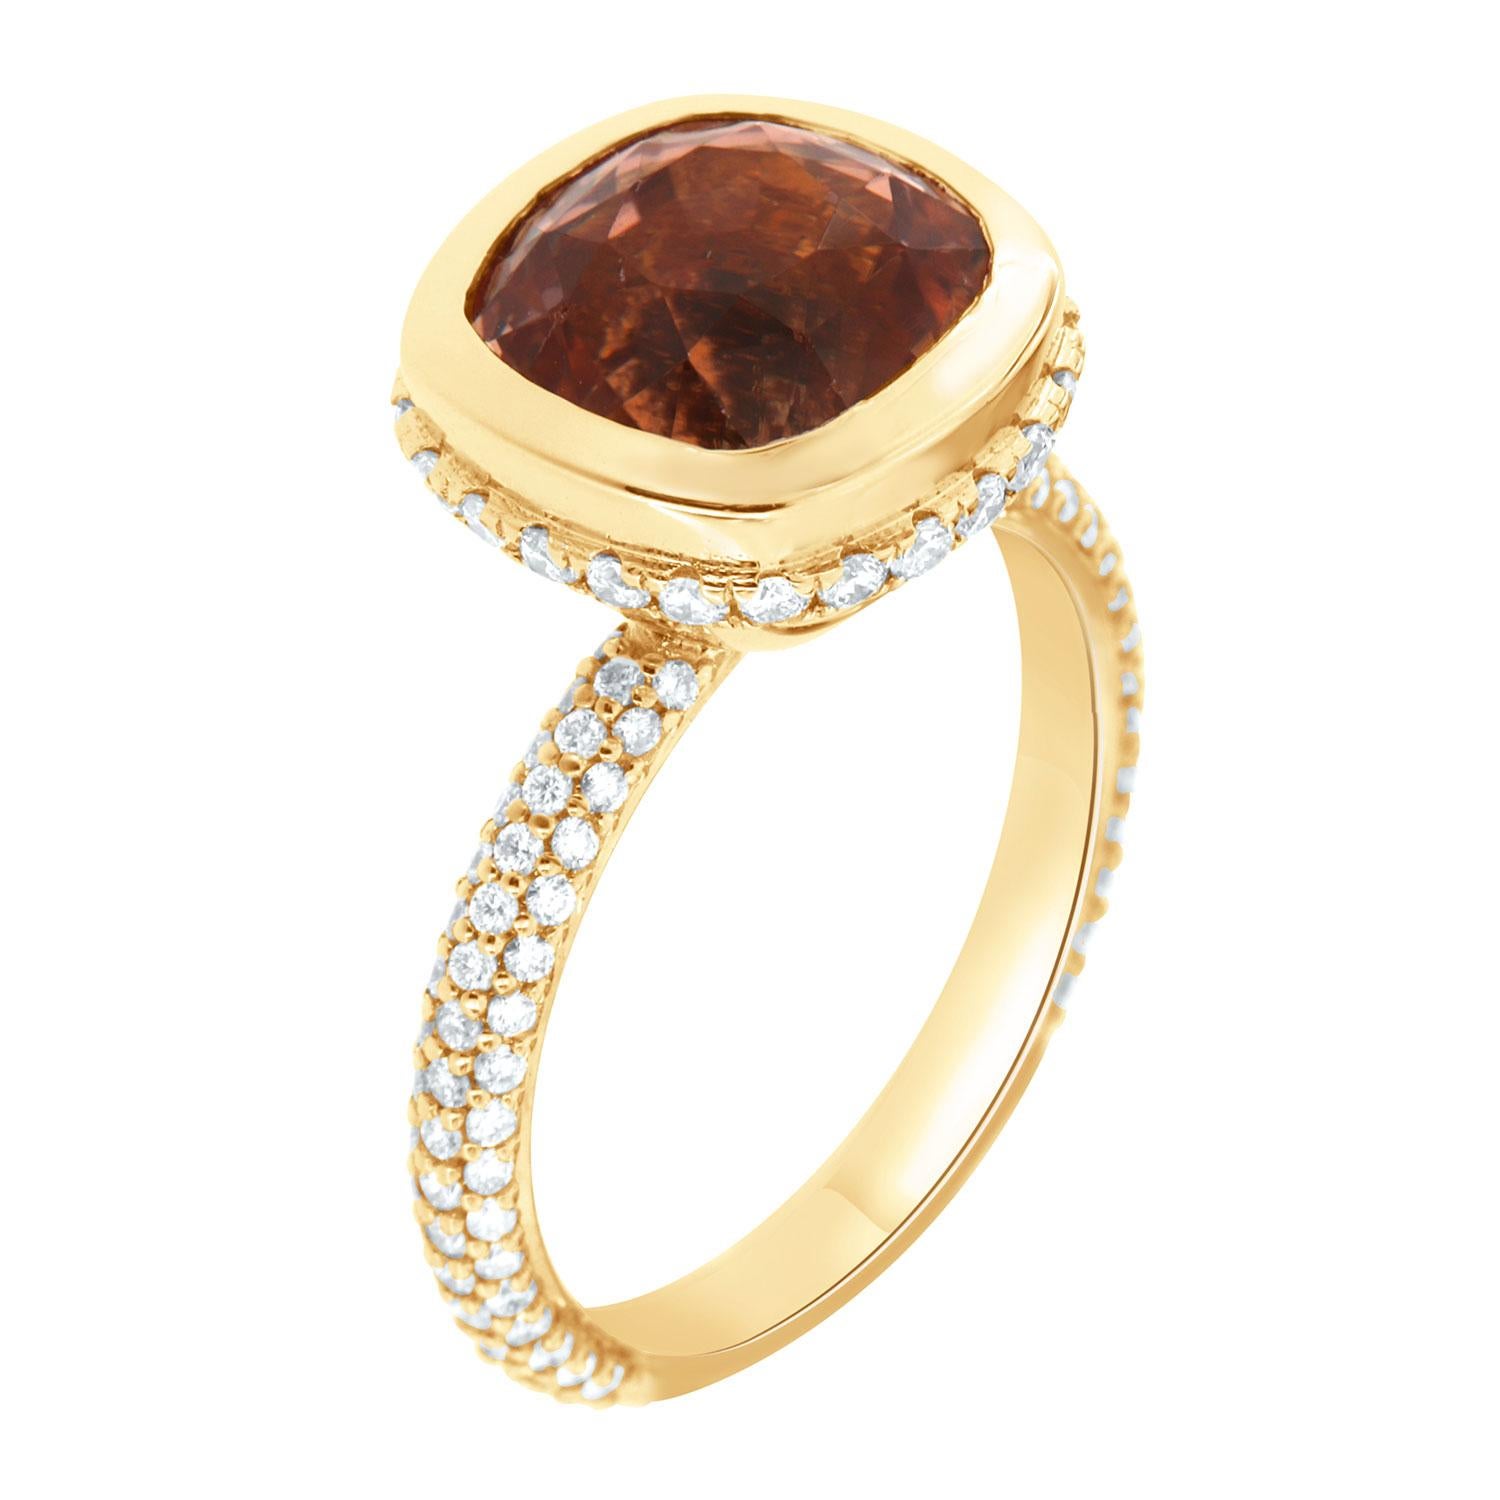 This 18k yellow gold ring features a GIA Certified rare 5.70-carat cushion shape Orange Tourmaline bezel set. Thirty (30) Brilliant round diamonds are micro-prong set in a hidden halo on the crown to create the sparkle look every woman is looking to